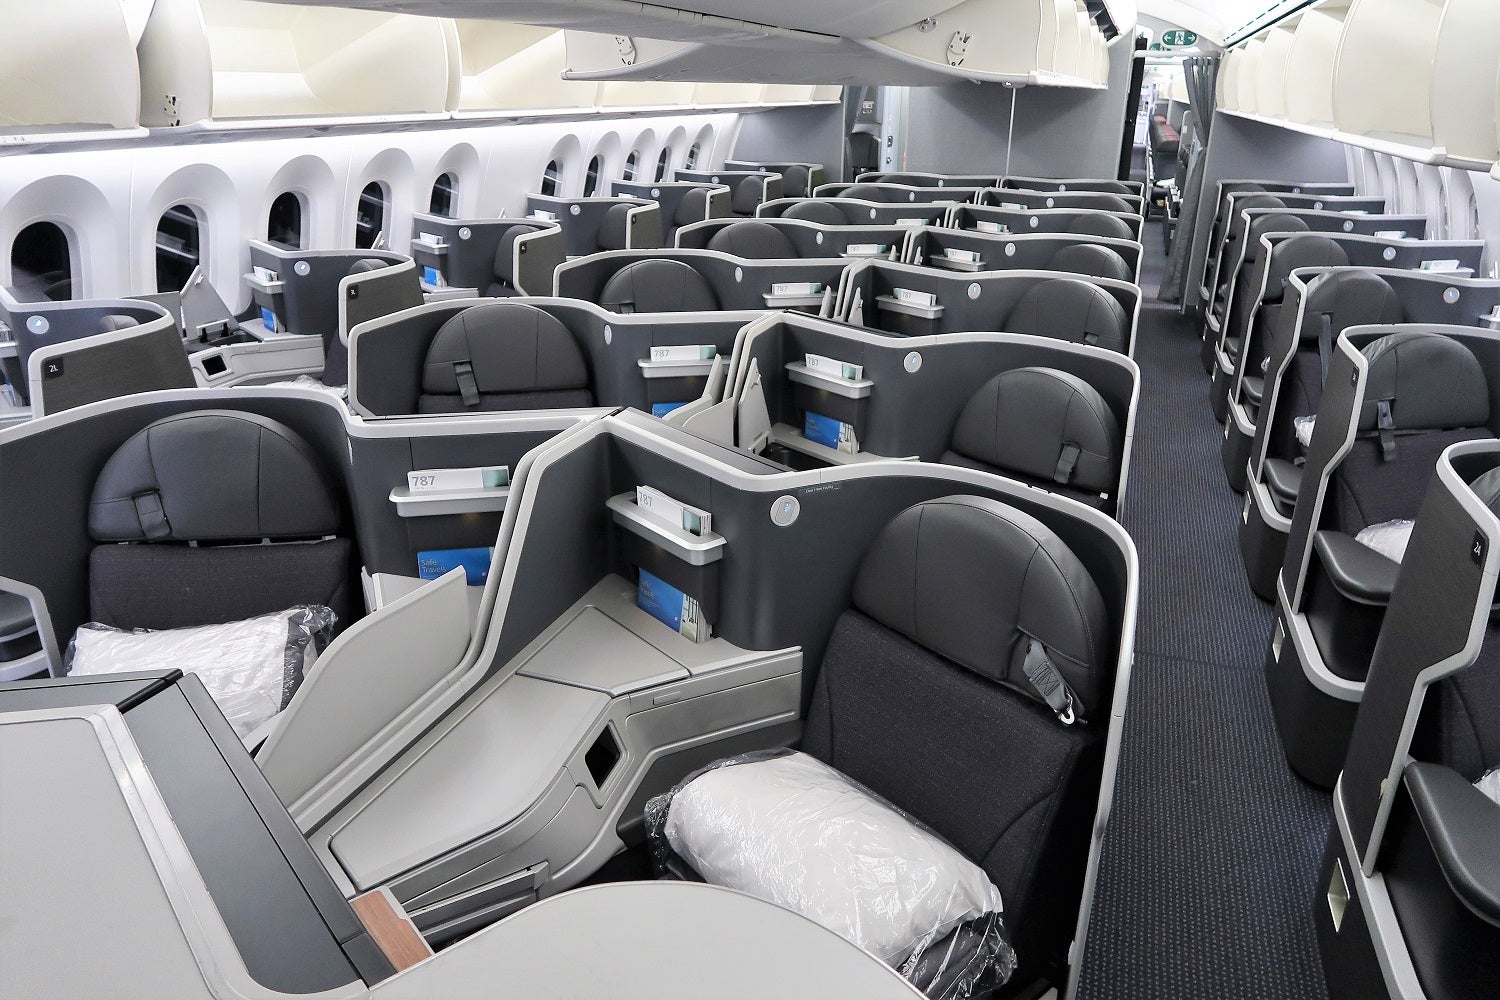 American Airlines 787 Business Class Seat Map - Sacha Clotilda